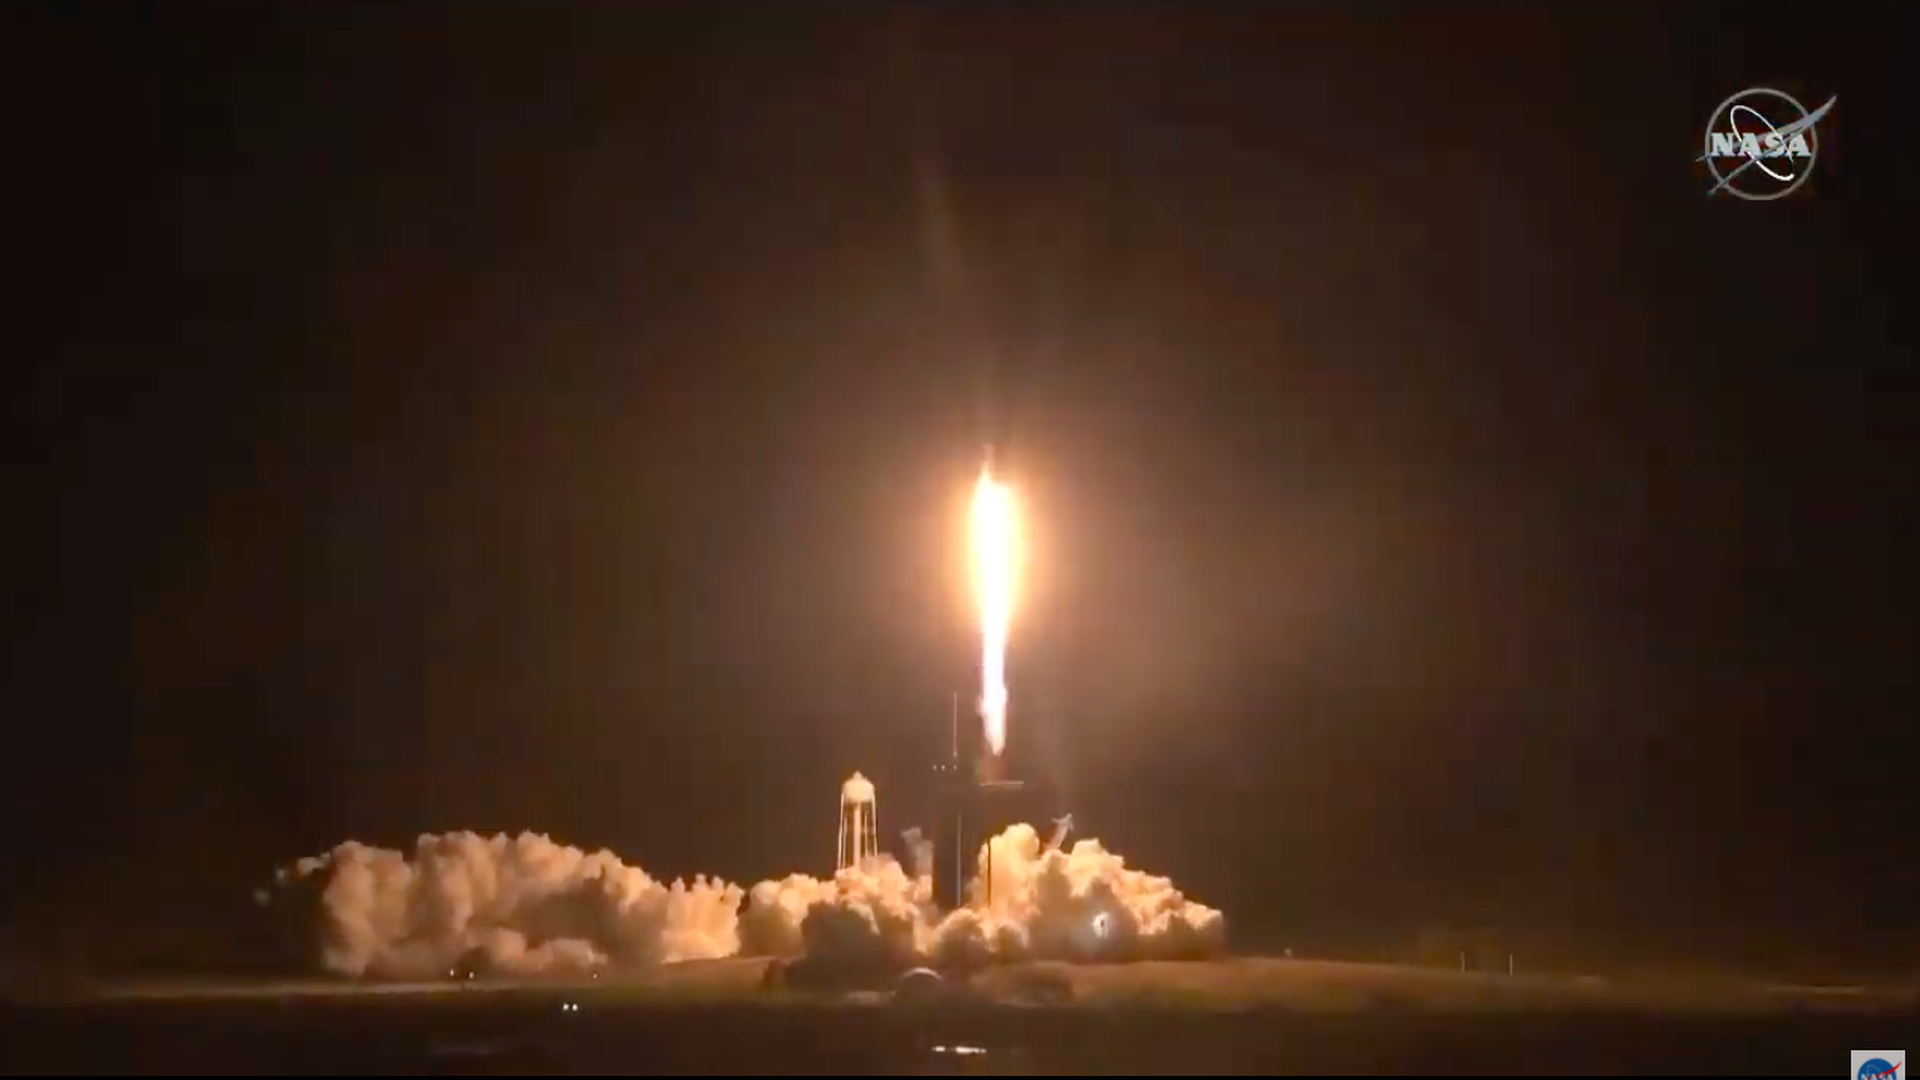 A Falcon 9 rocket carrying four crewmembers lifts off at night to the International Space Station